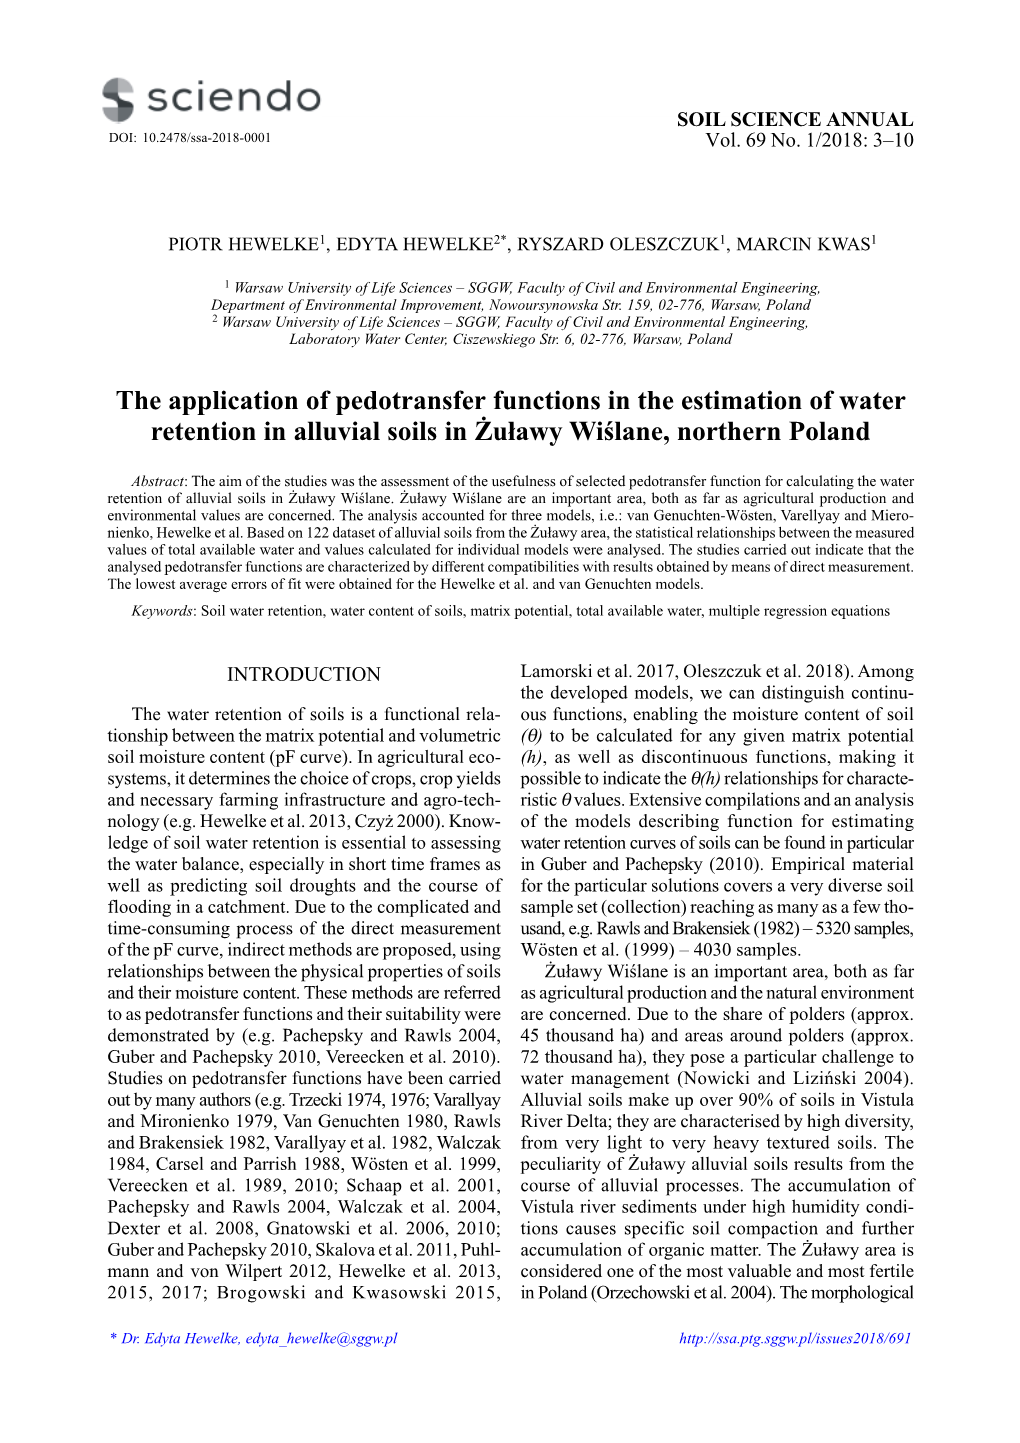 The Application of Pedotransfer Functions in the Estimation of Water Retention in Alluvial Soils in ¯U³awy Wiœlane, Northern Poland